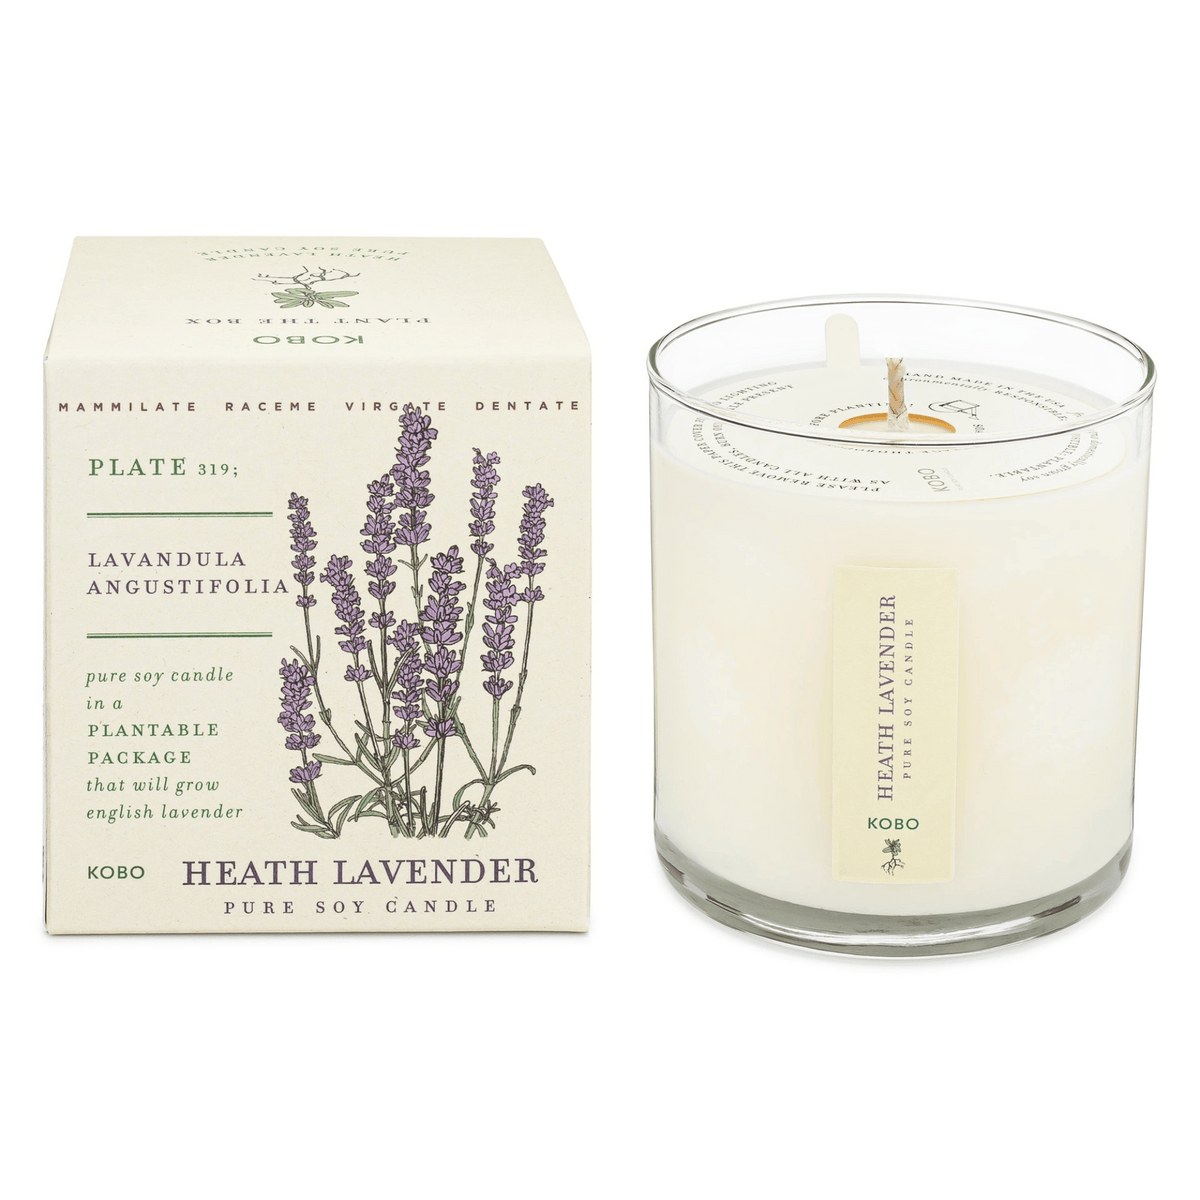 Primary Image of Heath Lavender Plant the Box Candle